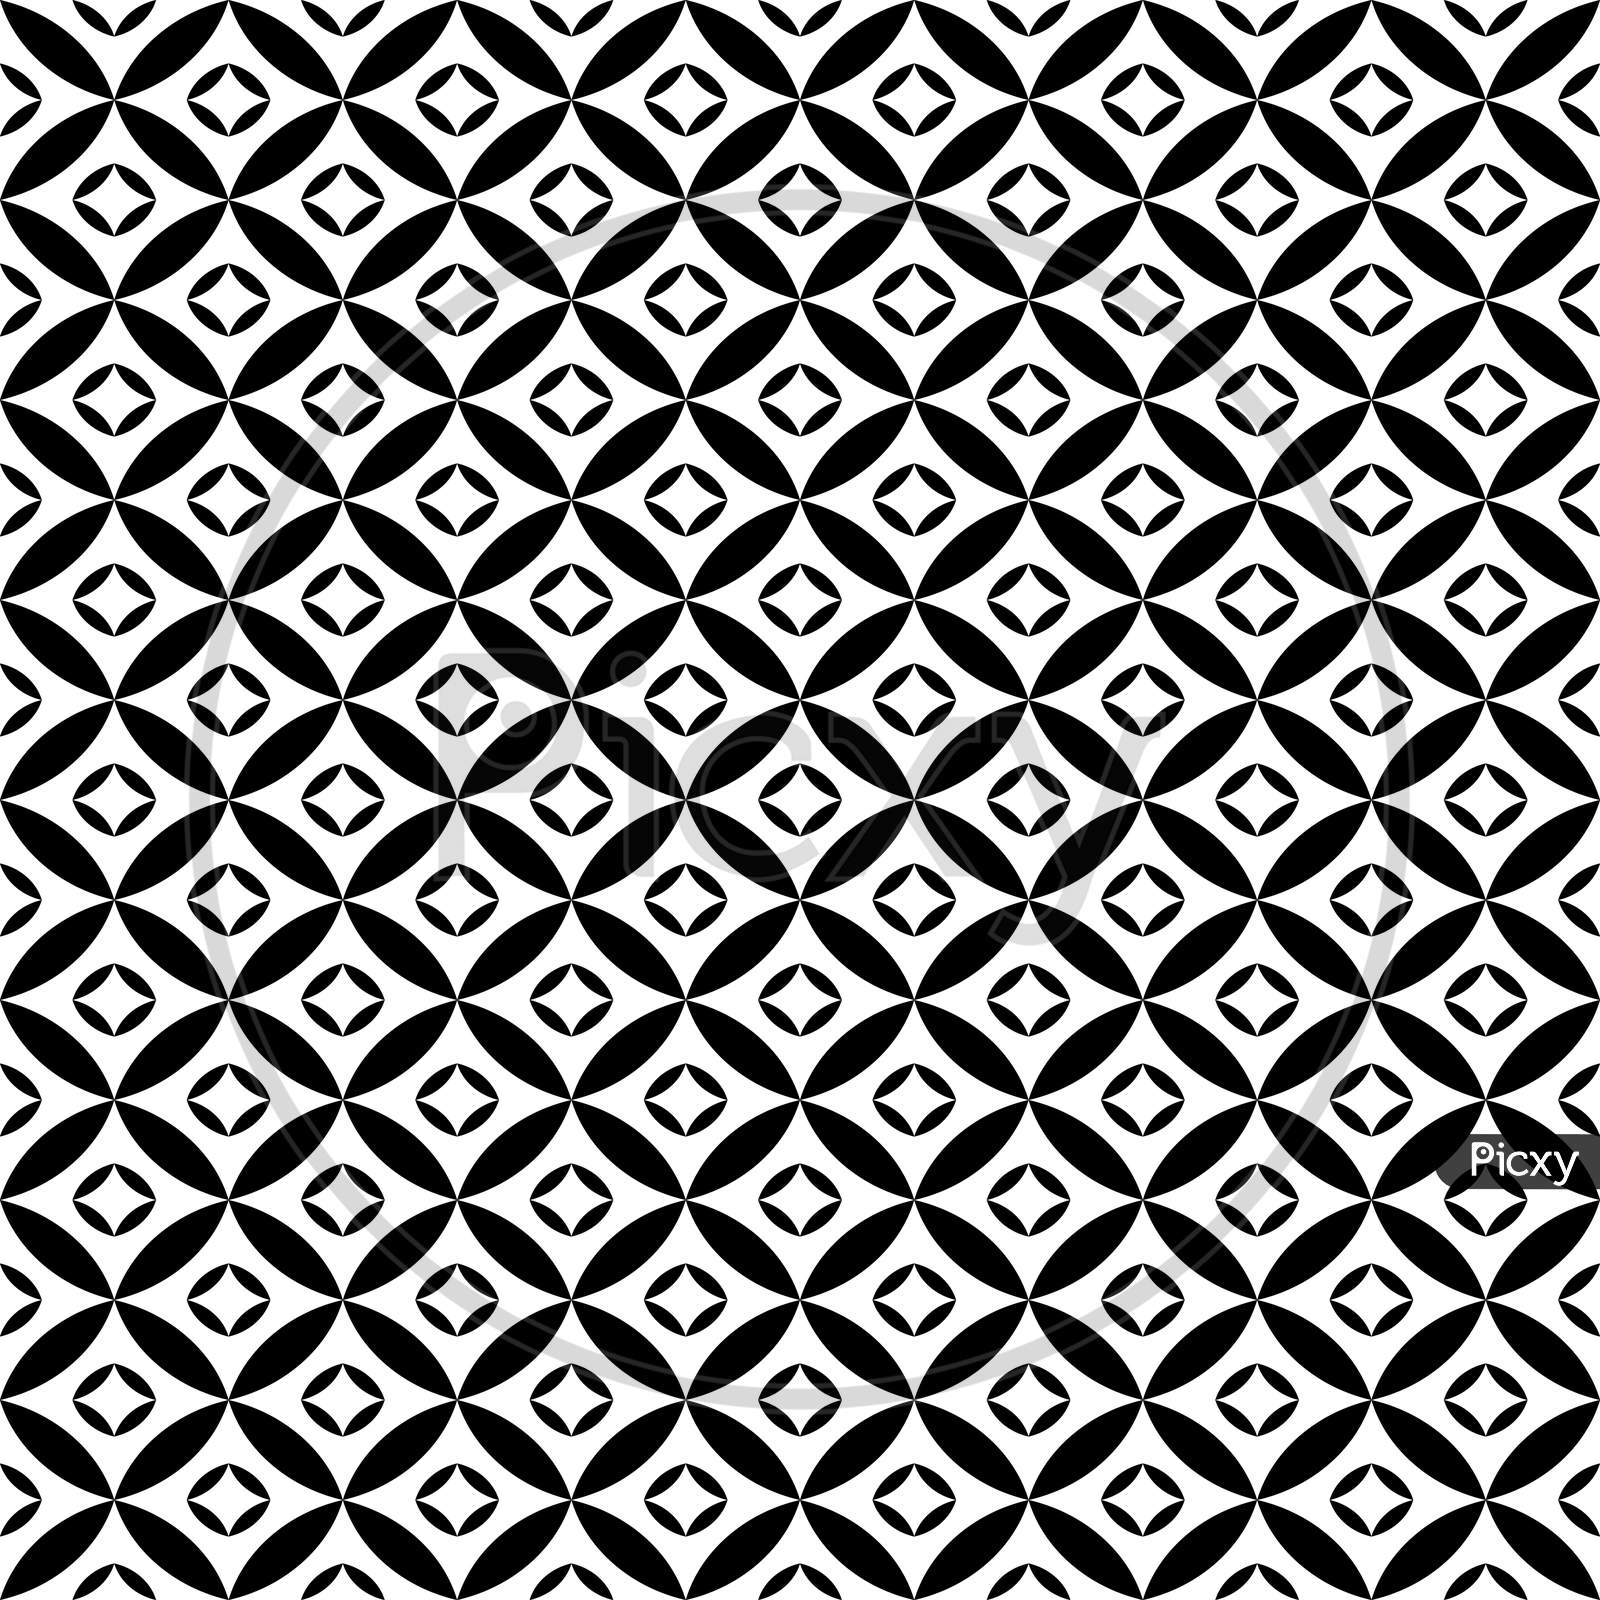 Seamless Geometric Pattern. Geometric Simple Print. Repeating Texture Design.Stylish Background For Fabric, Wrapping, Packaging Paper, Wallpaper. Leaf Pattern Design.